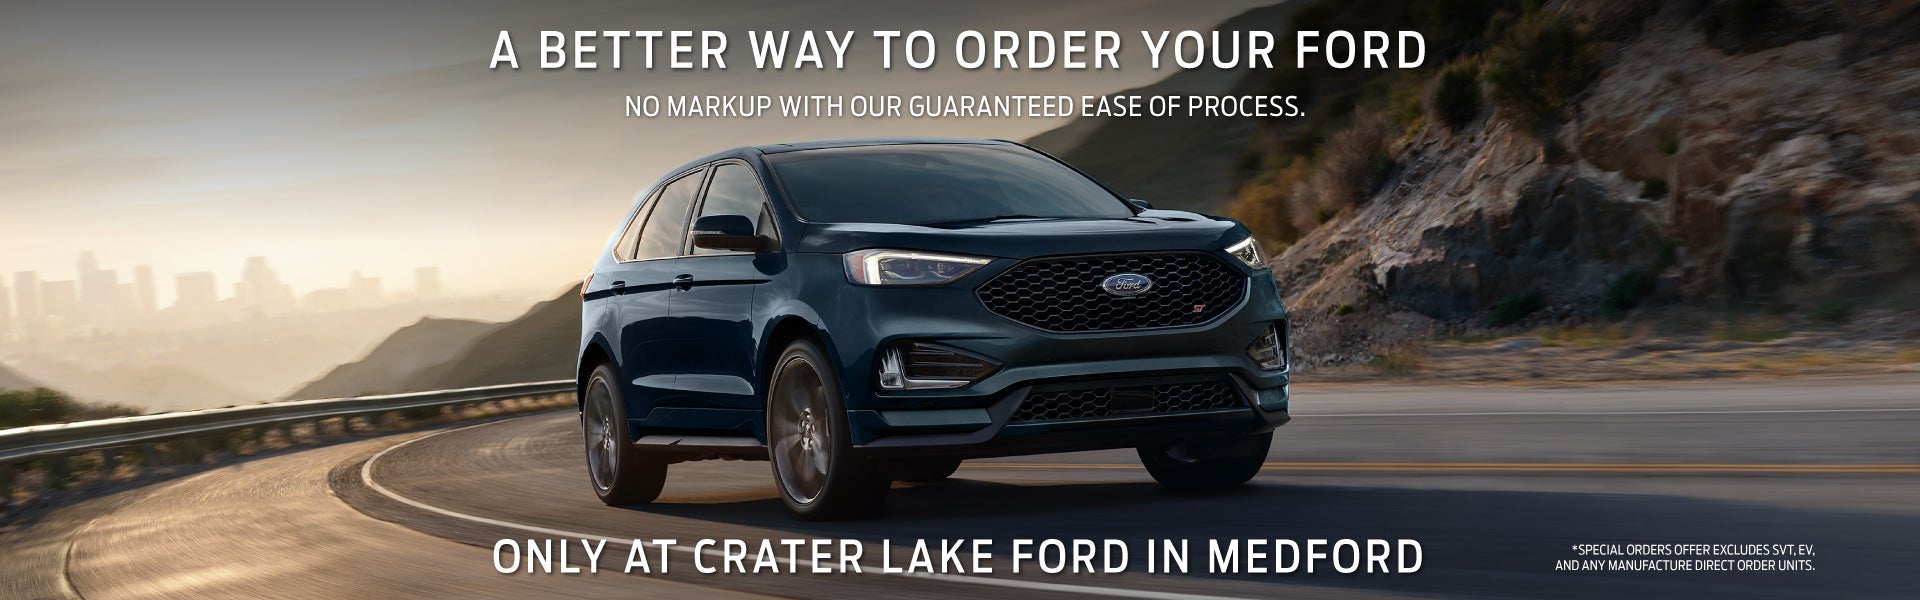 Custom Order Your Ford